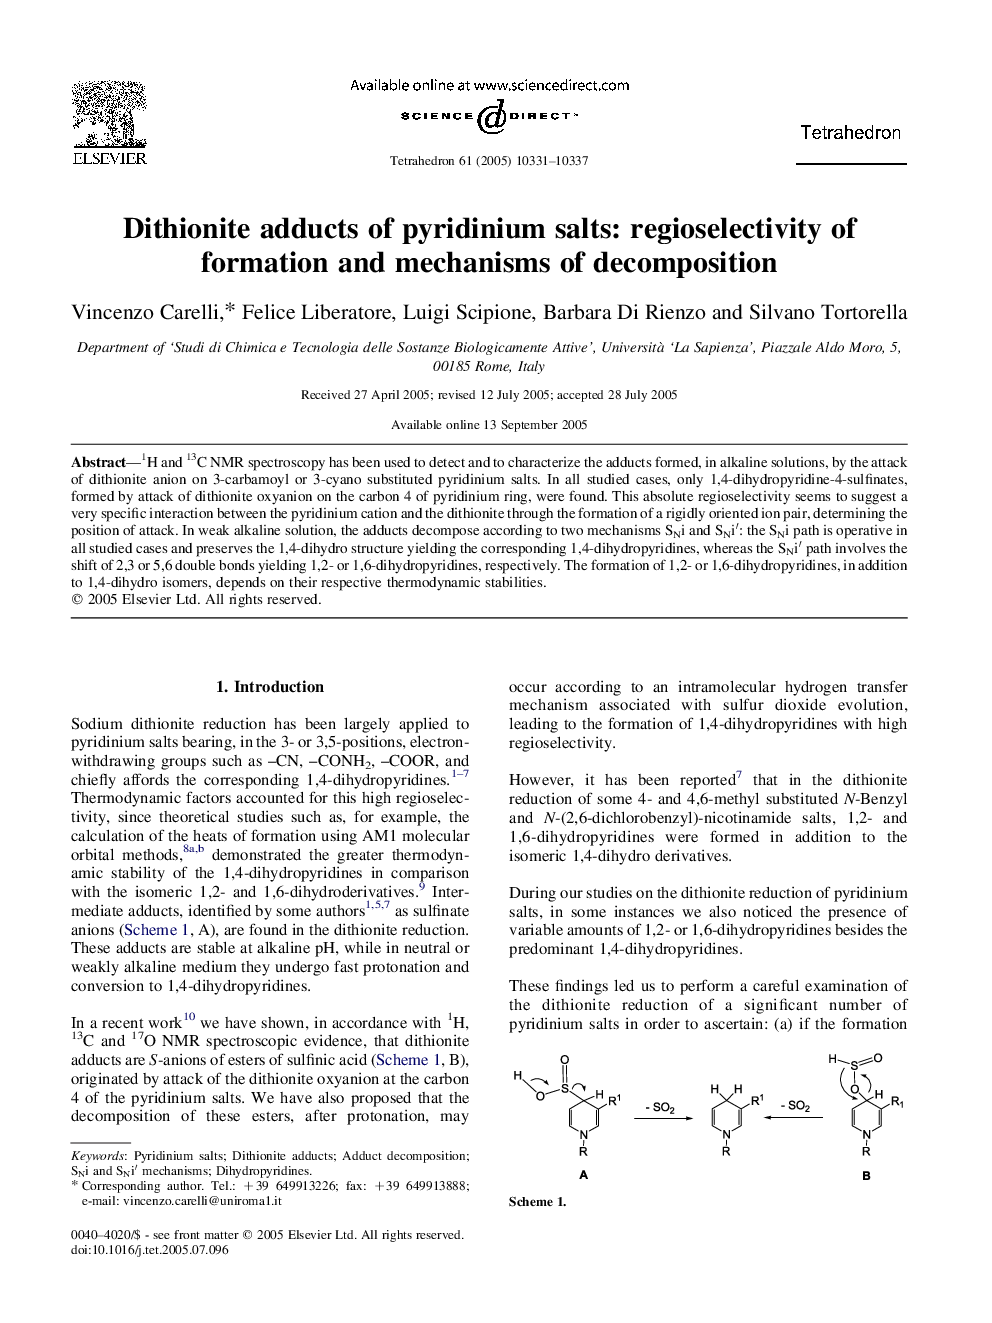 Dithionite adducts of pyridinium salts: regioselectivity of formation and mechanisms of decomposition